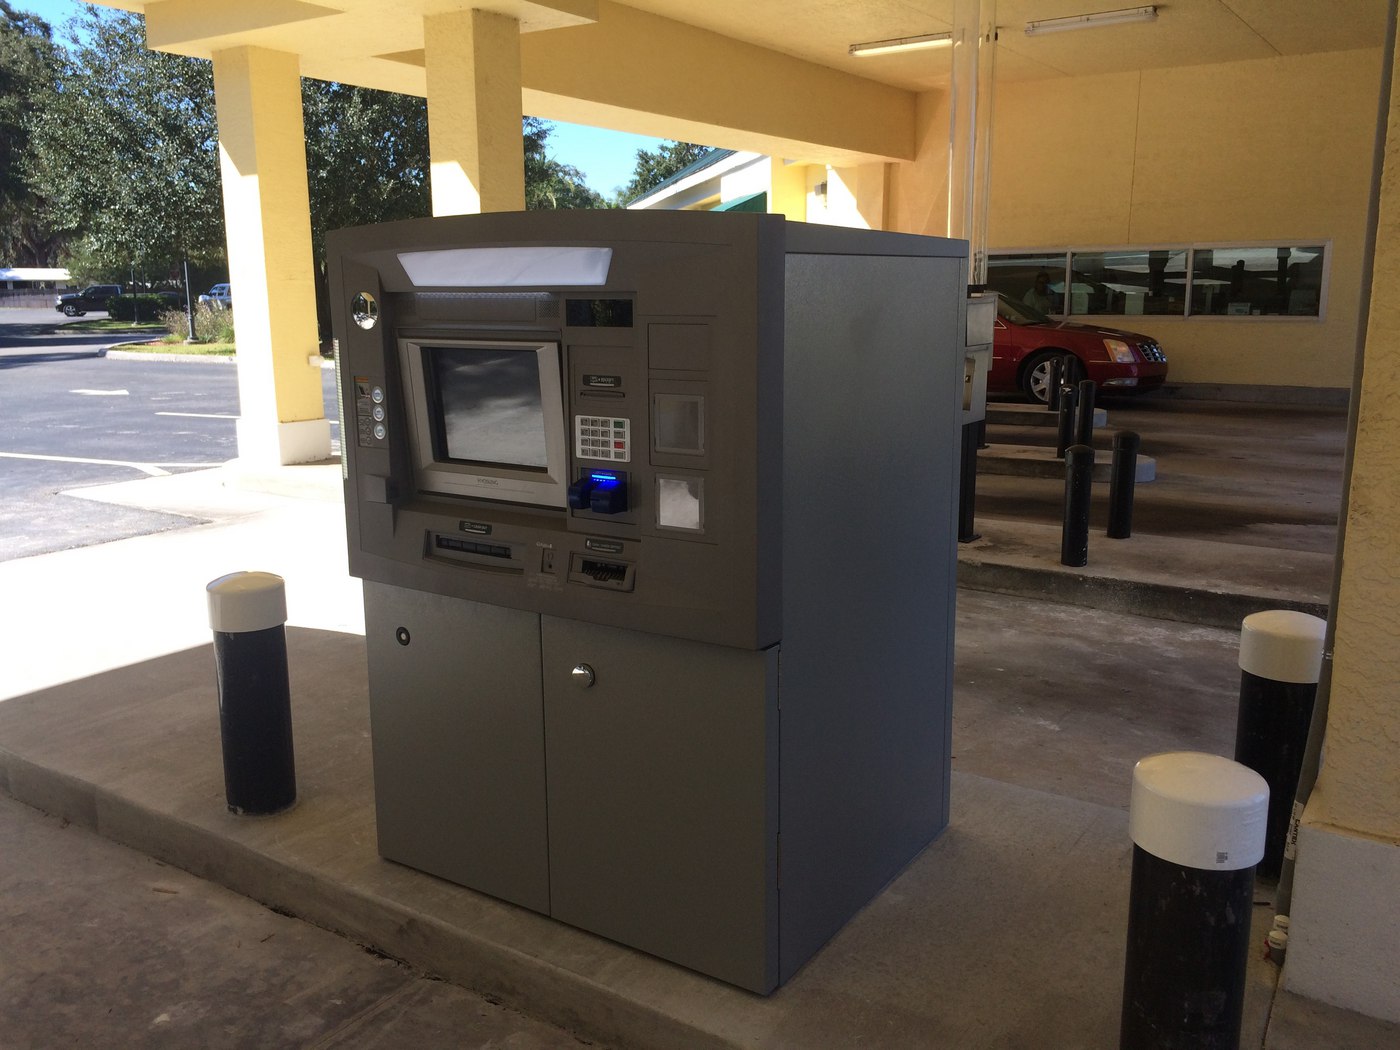 3 Things to Consider When Buying (or Replacing) an ATM